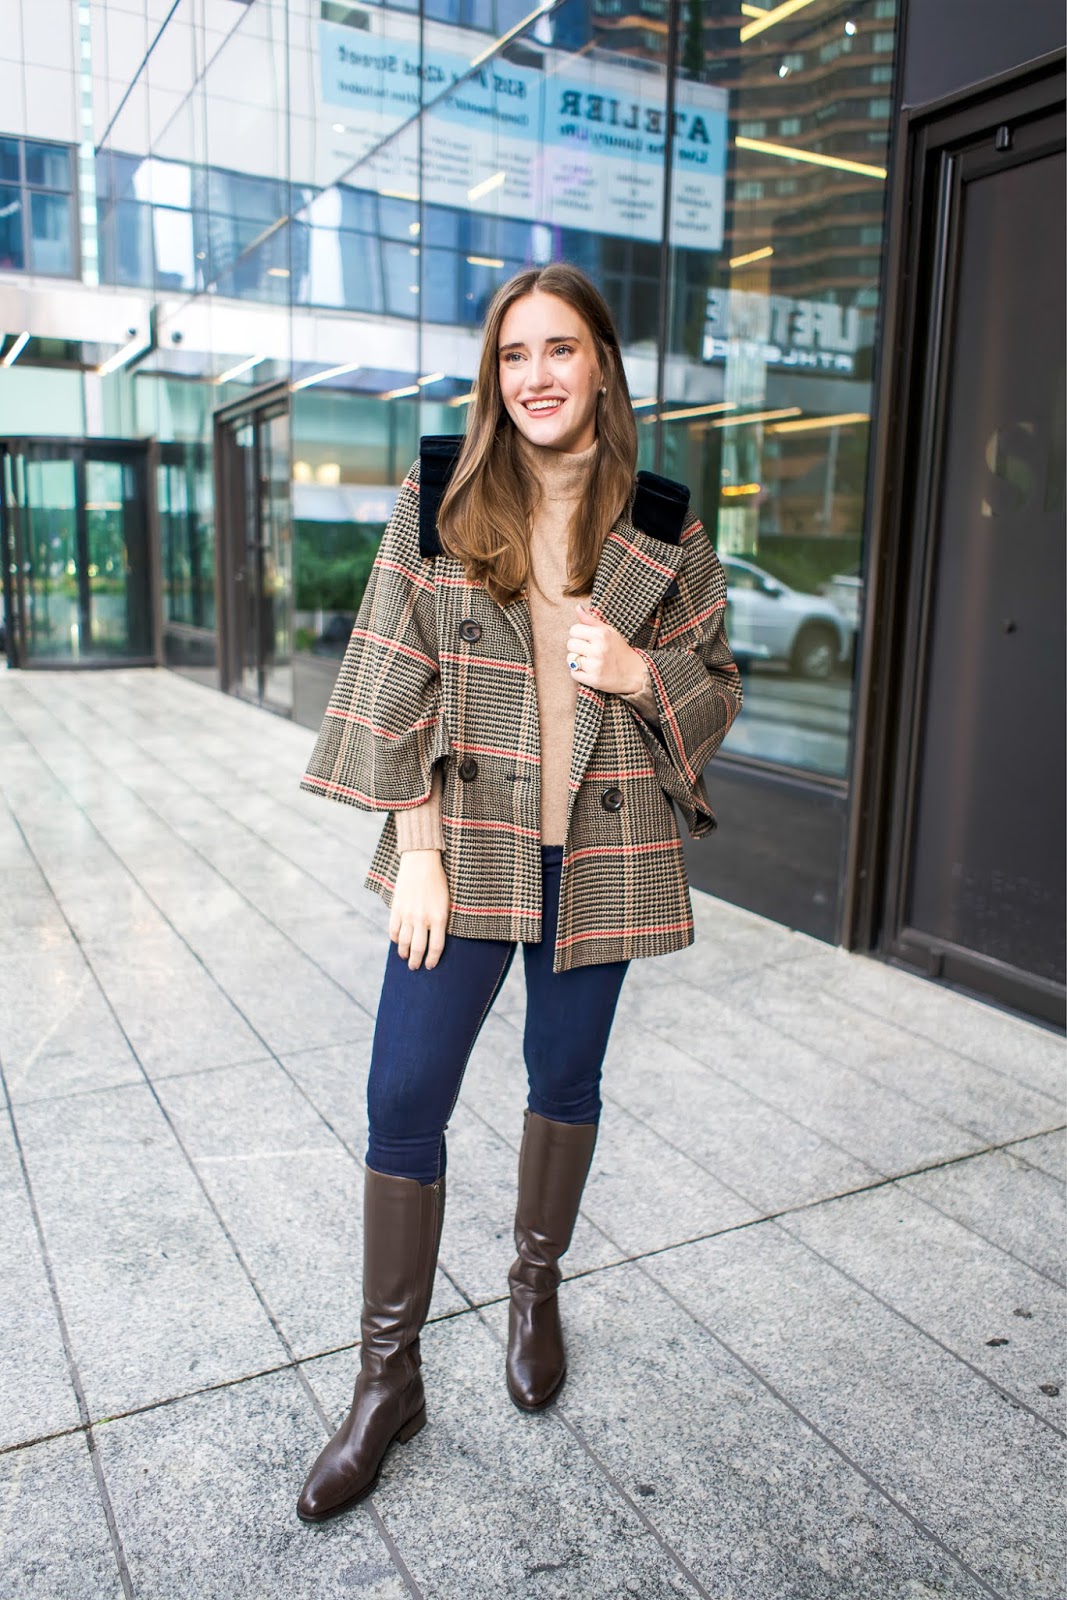 Rainy Fall Day in NYC | Connecticut Fashion and Lifestyle Blog ...